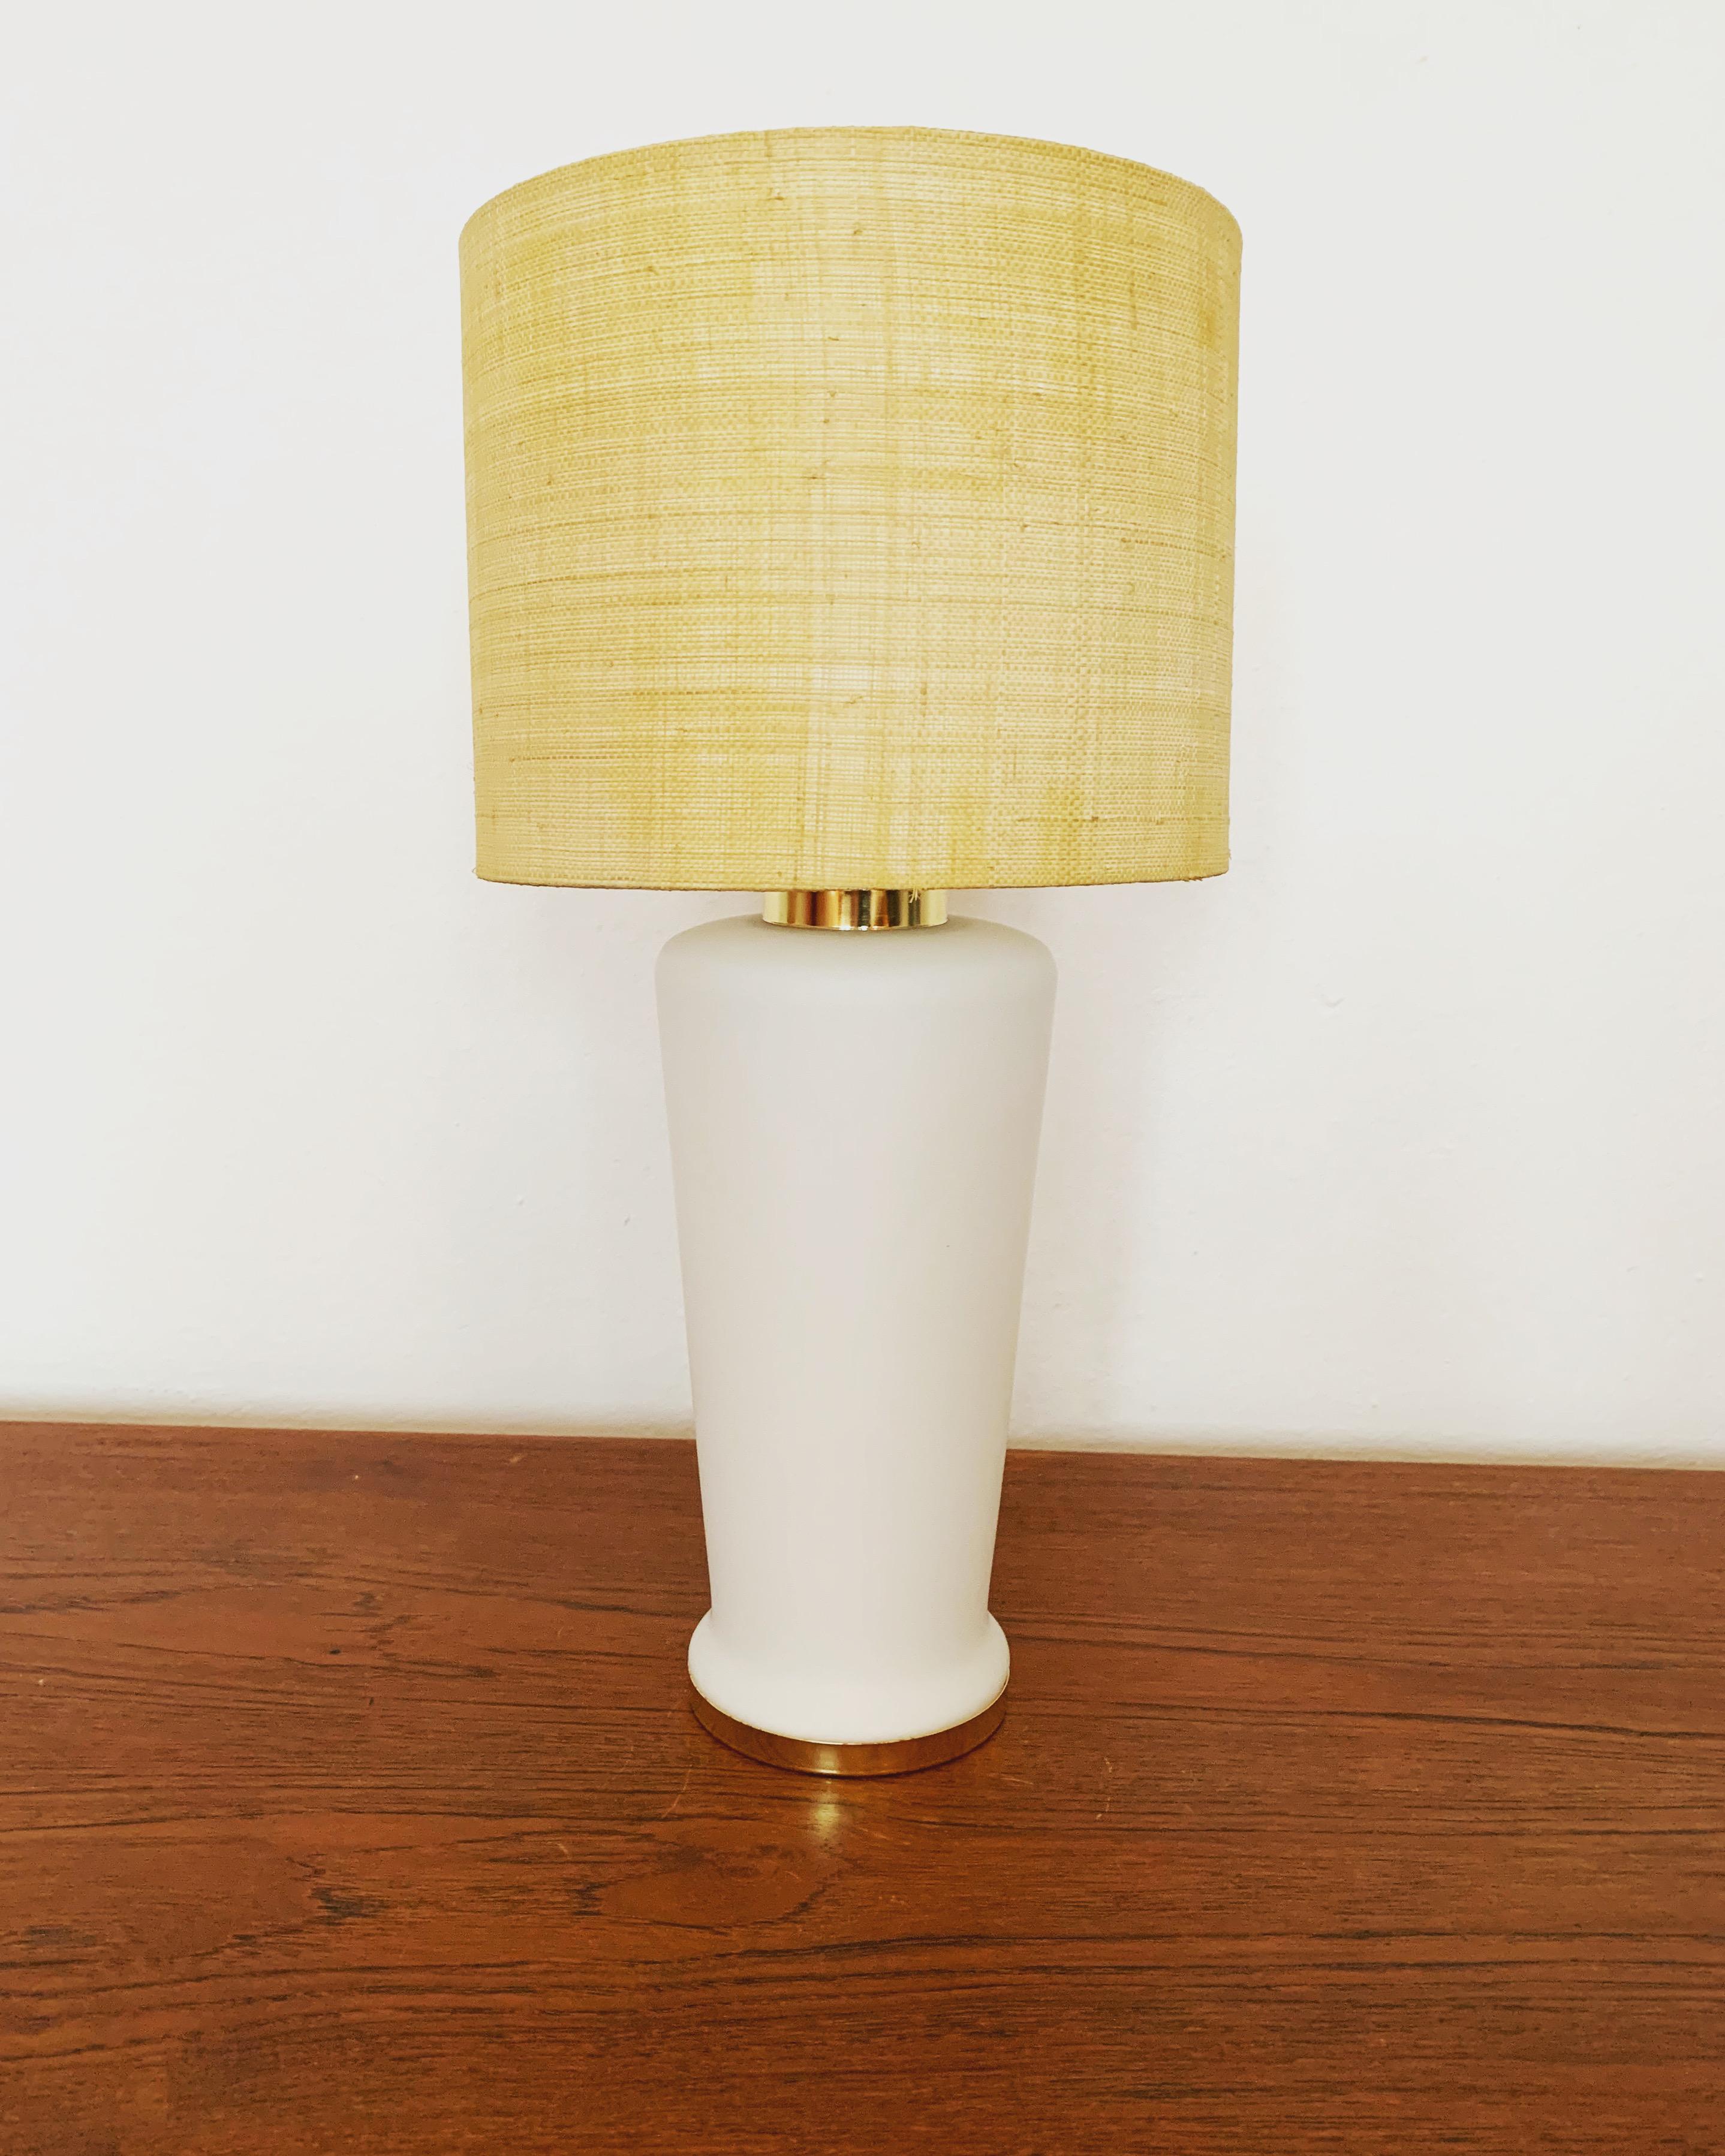 Particularly beautiful glass table lamp from the 1960s.
The lamp has a separately switchable socket in the lamp base.
A very nice lighting mood is created.

The pictures are part of the description.

If you have any questions, I'm happy to